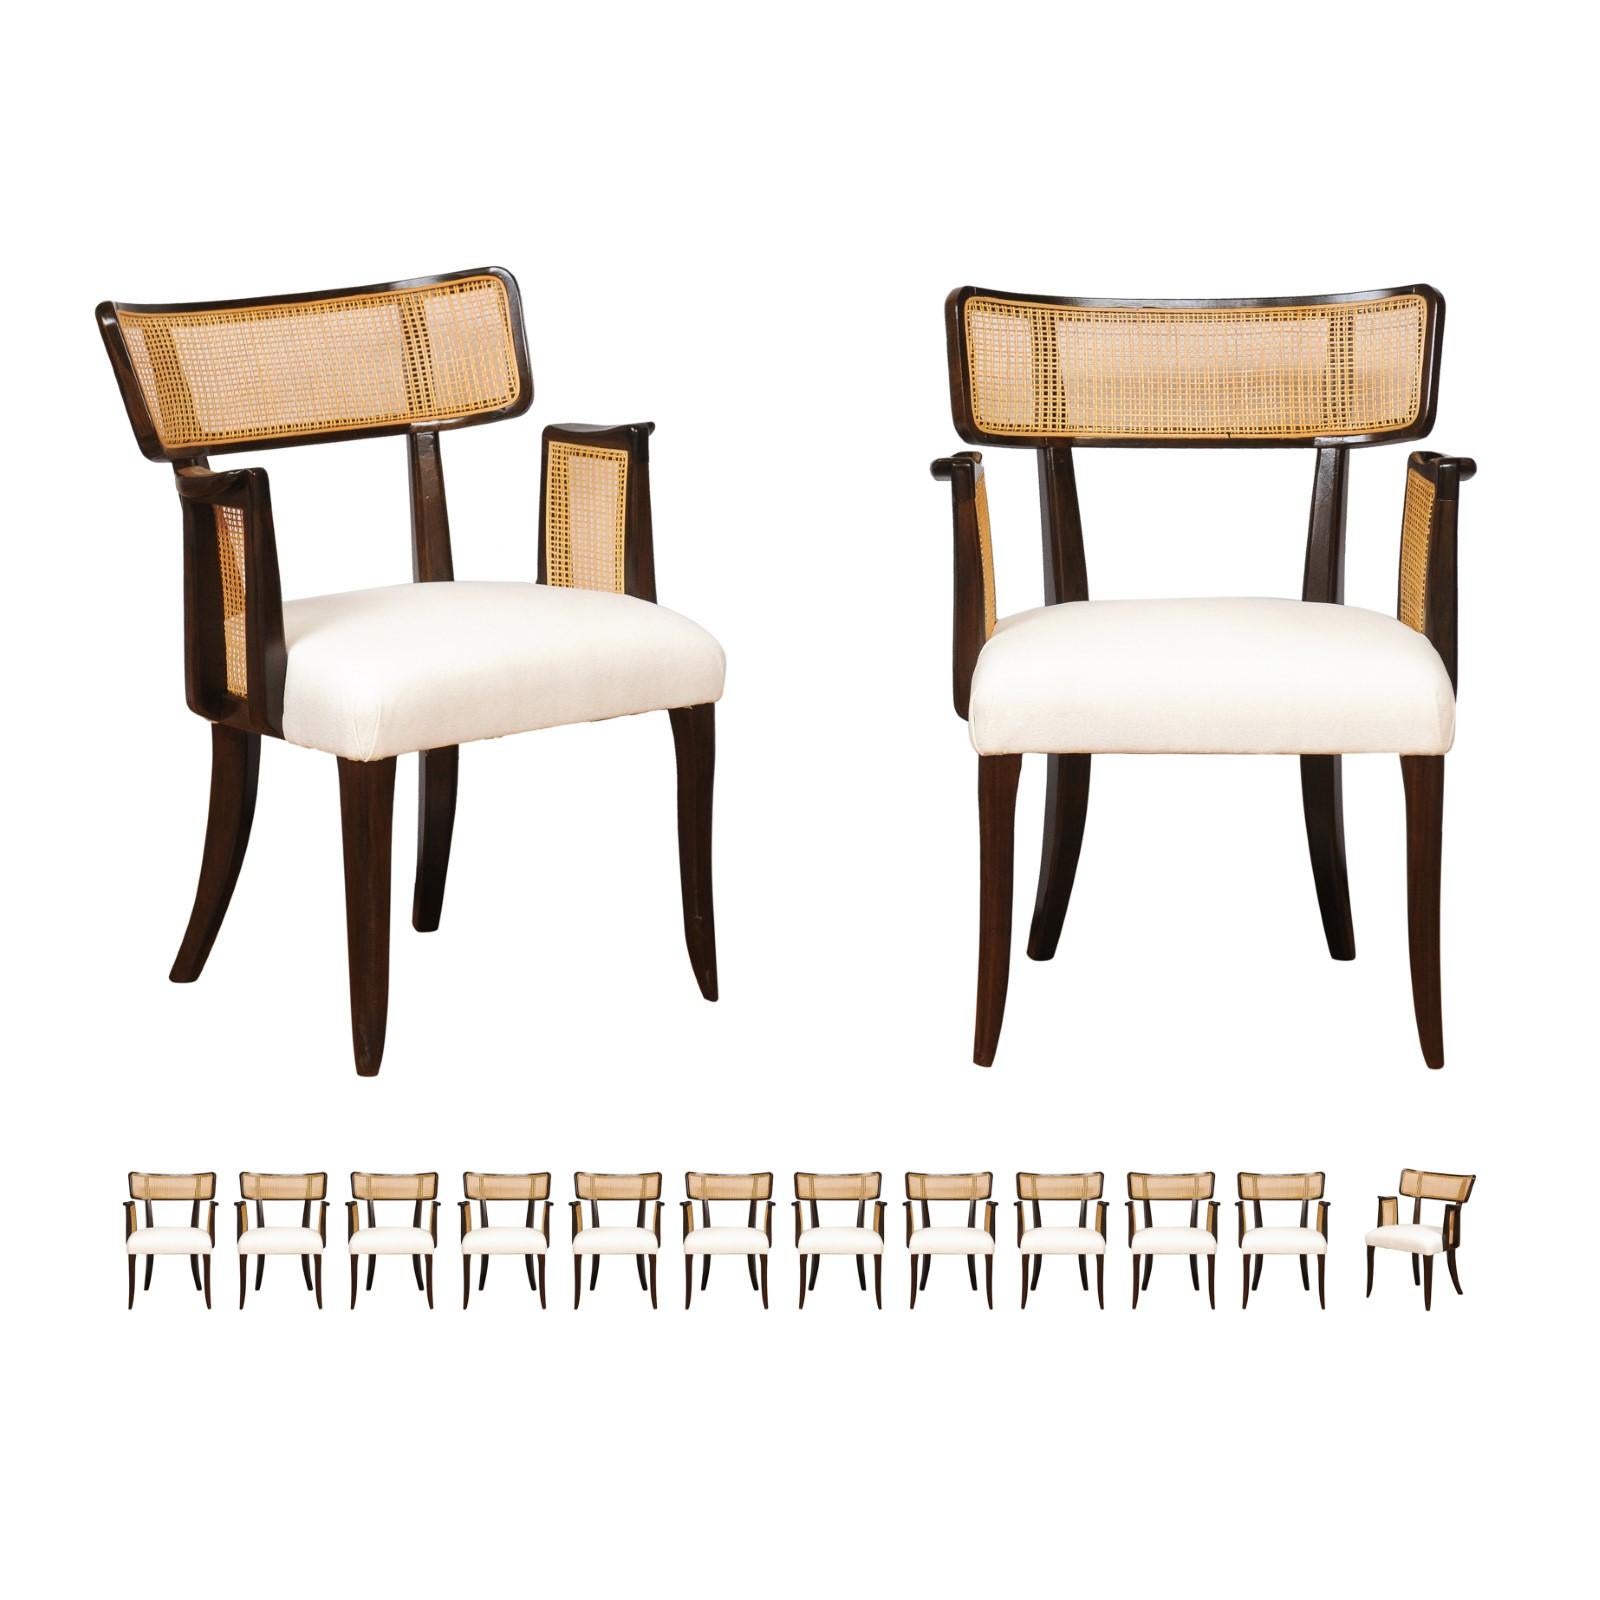 All Arms- Miraculous Set of 14 Arm Klismos Cane Dining Chairs by Edward Wormley For Sale 10